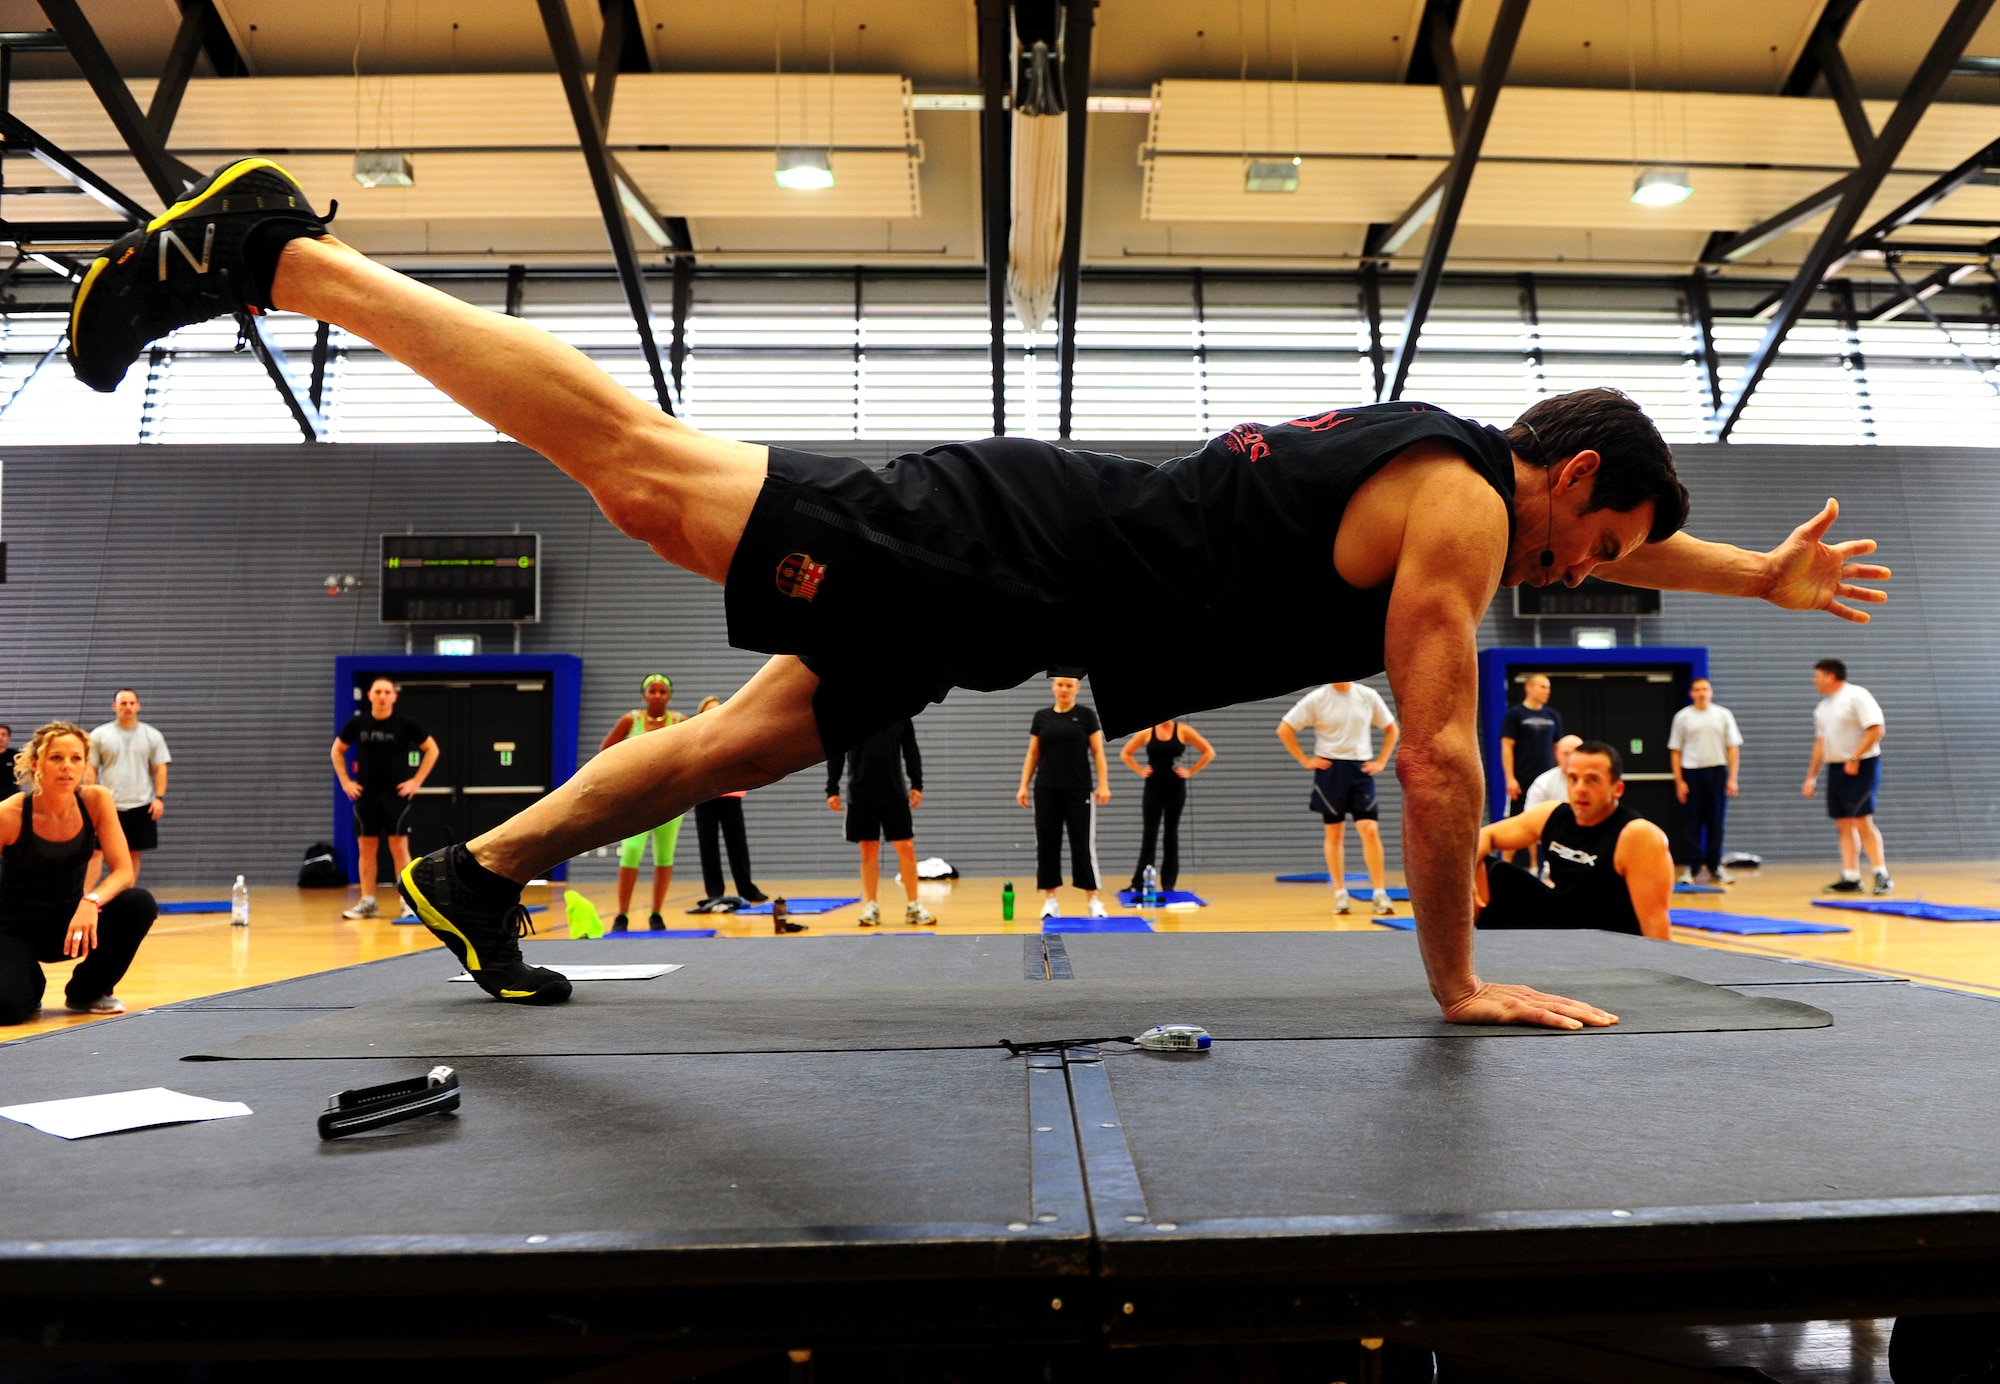 Tony Horton, creator of workout program P90X, demontrates an excercise during a calisthenics routine at the southside gym, Ramstein Air Base, Germany, Oct. 7, 2011. Horton conducted two free strength training workout sessions for 325 military personnel and dependents. (U.S. Air Force photo by Airman 1st Class Brea Miller)